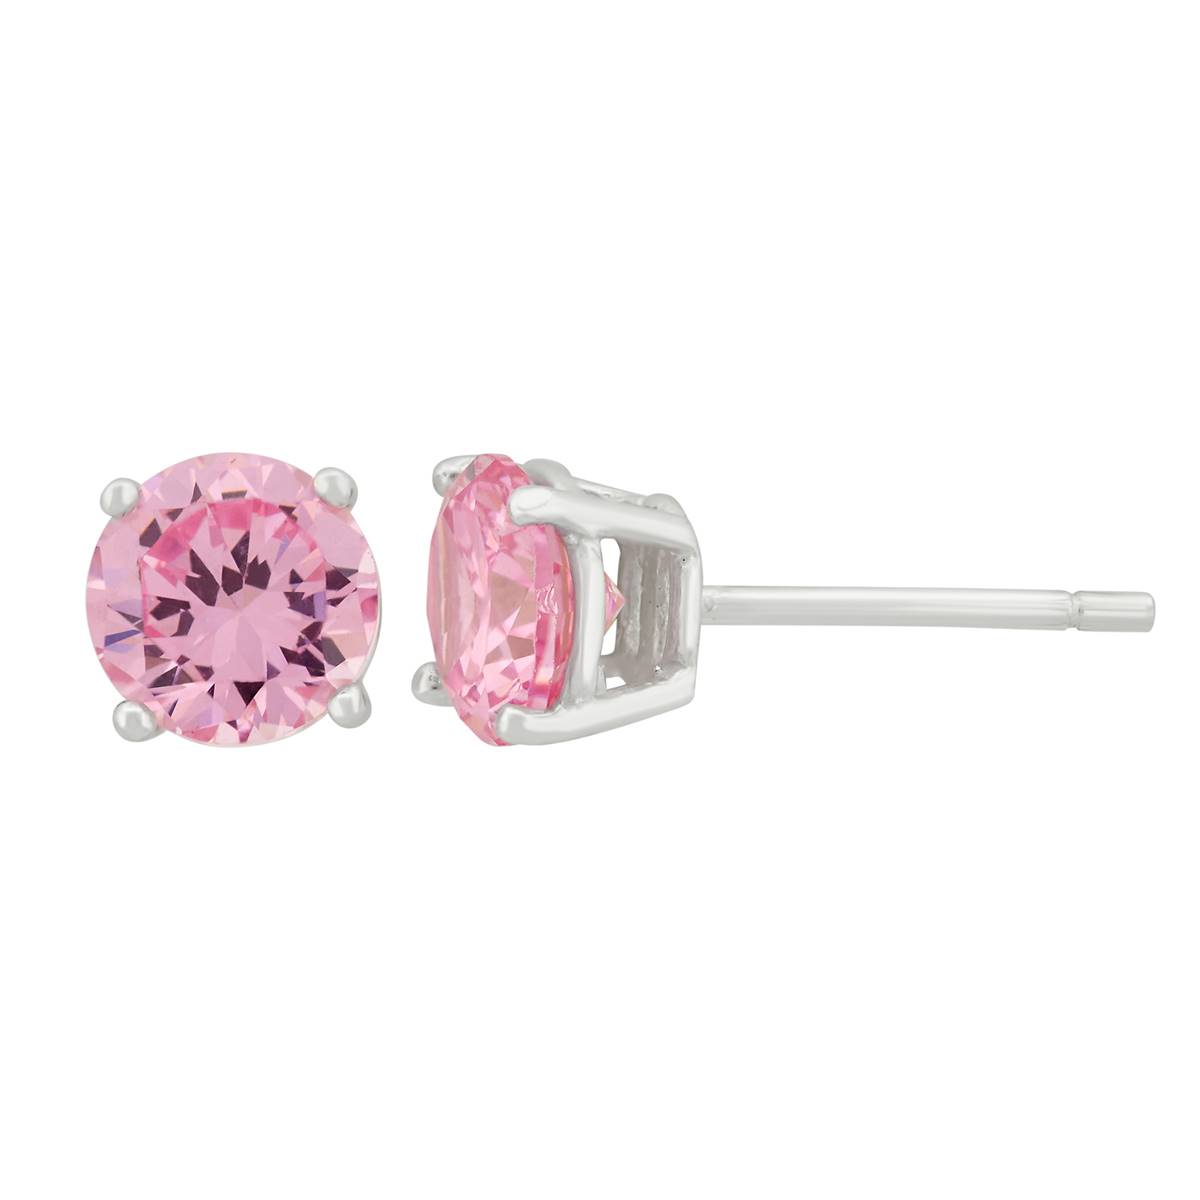 Forever New 6mm Round Pink CZ Stud Earrings